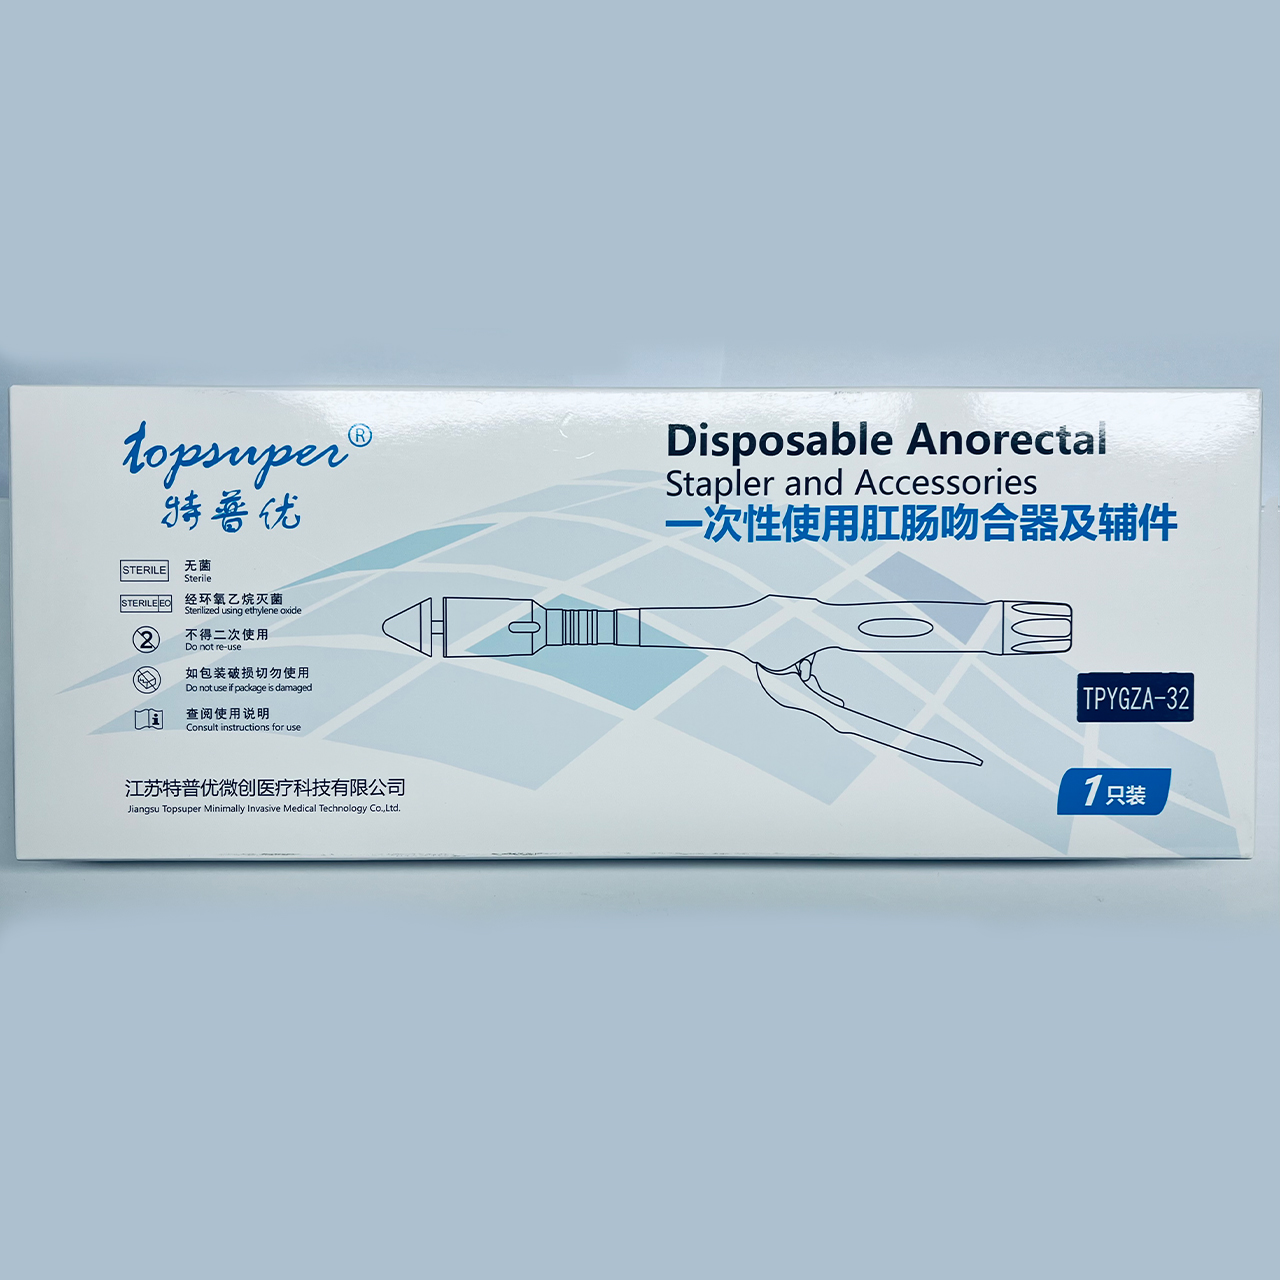 Disposable Anorectal Staplers and Accessories